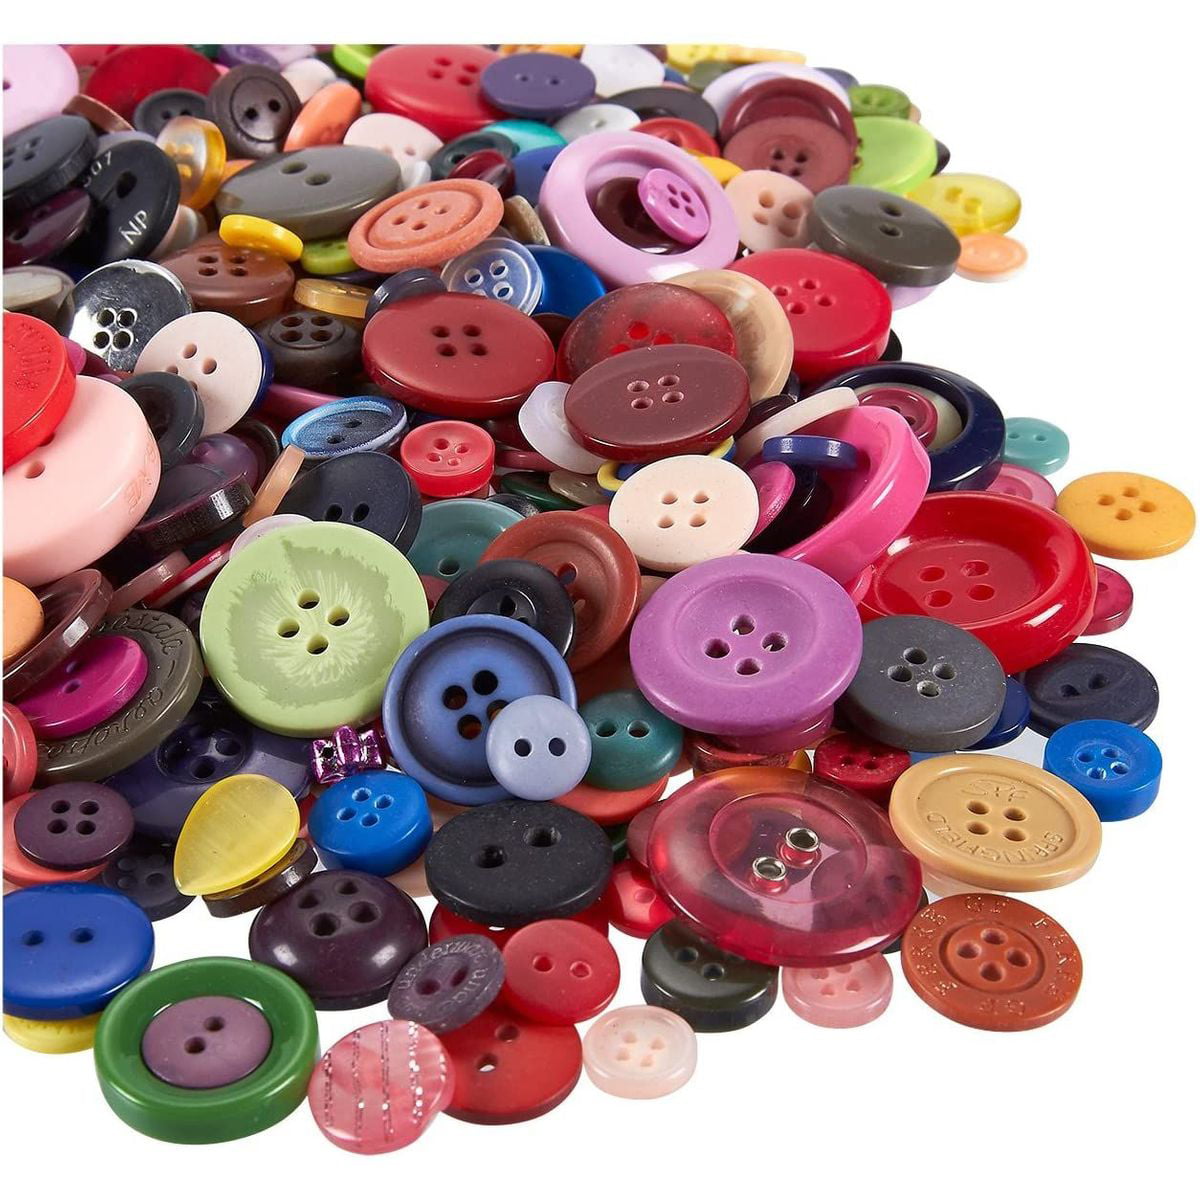 Lot 100 Mixed Assorted RED Vintage & New Buttons Bulk Free Shipping Crafts